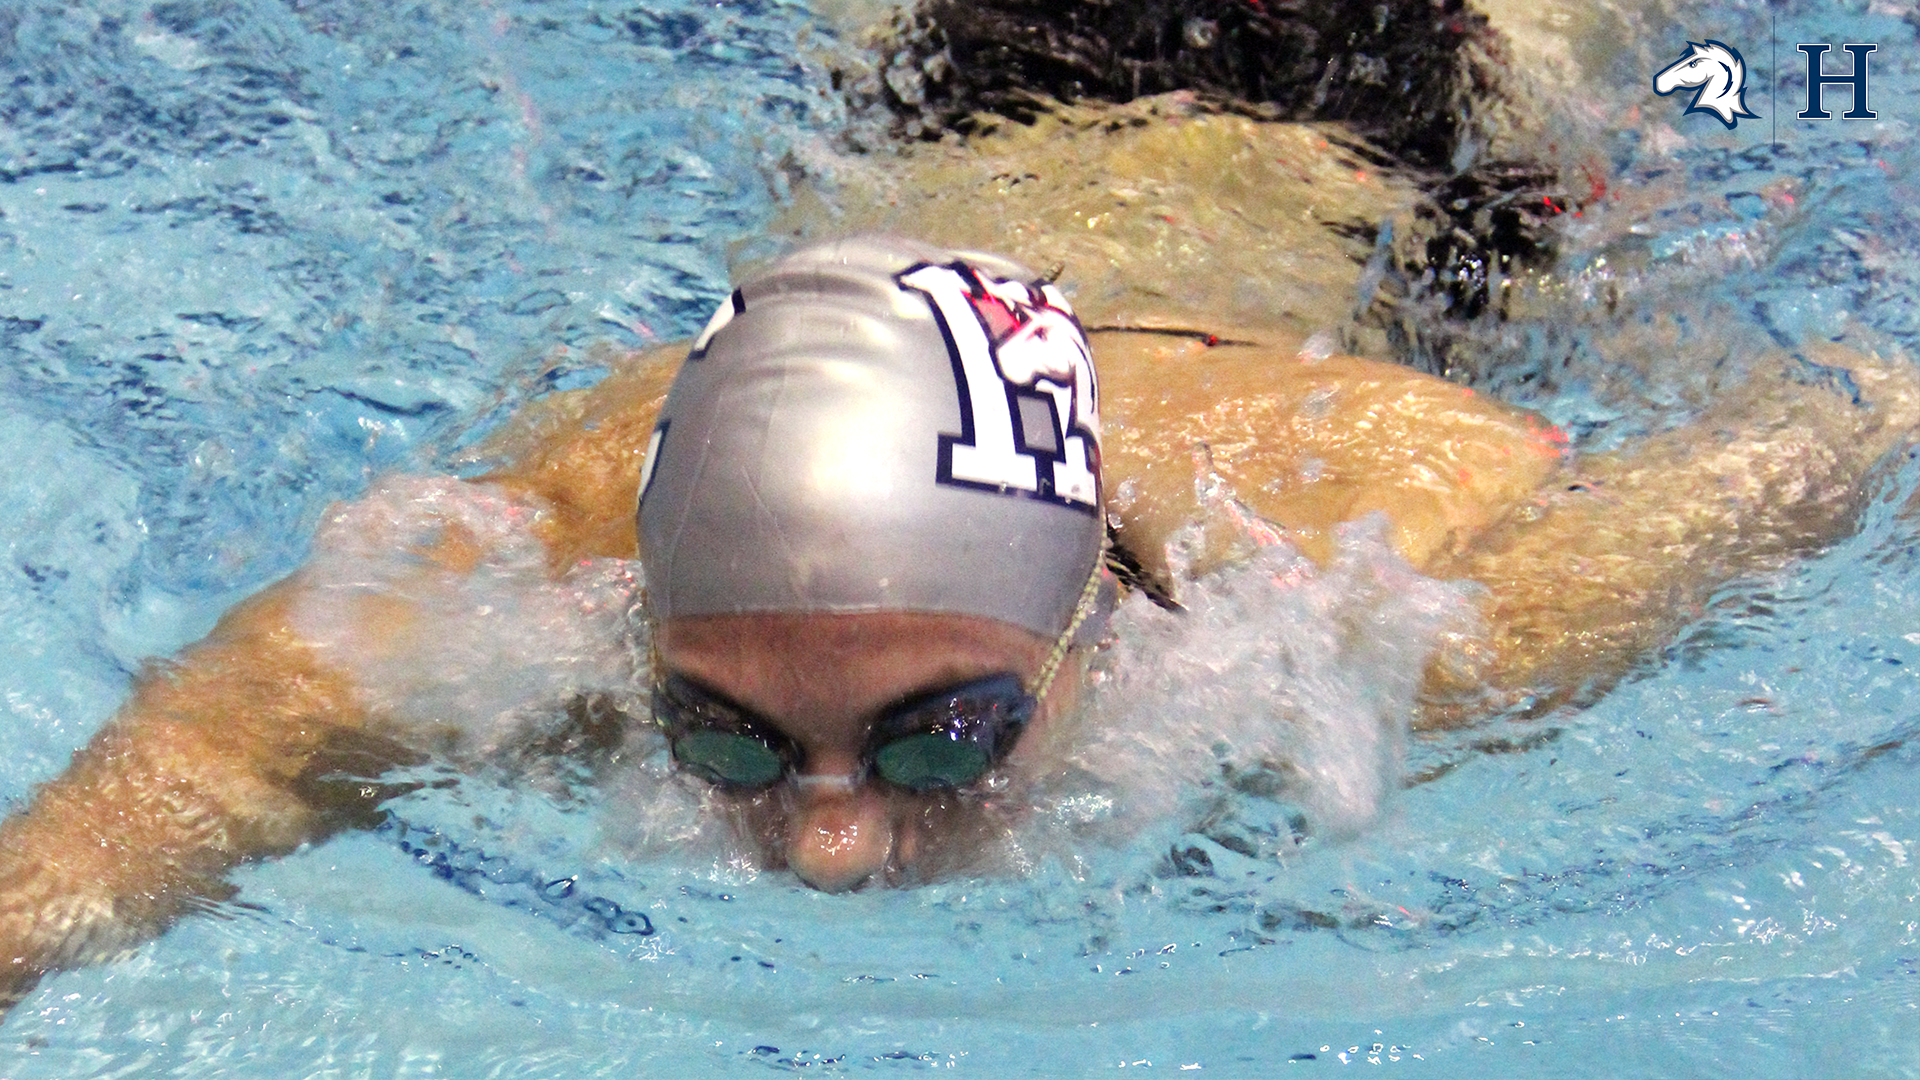 Charger women's swim stays unbeaten with 125-101 win over host Ashland